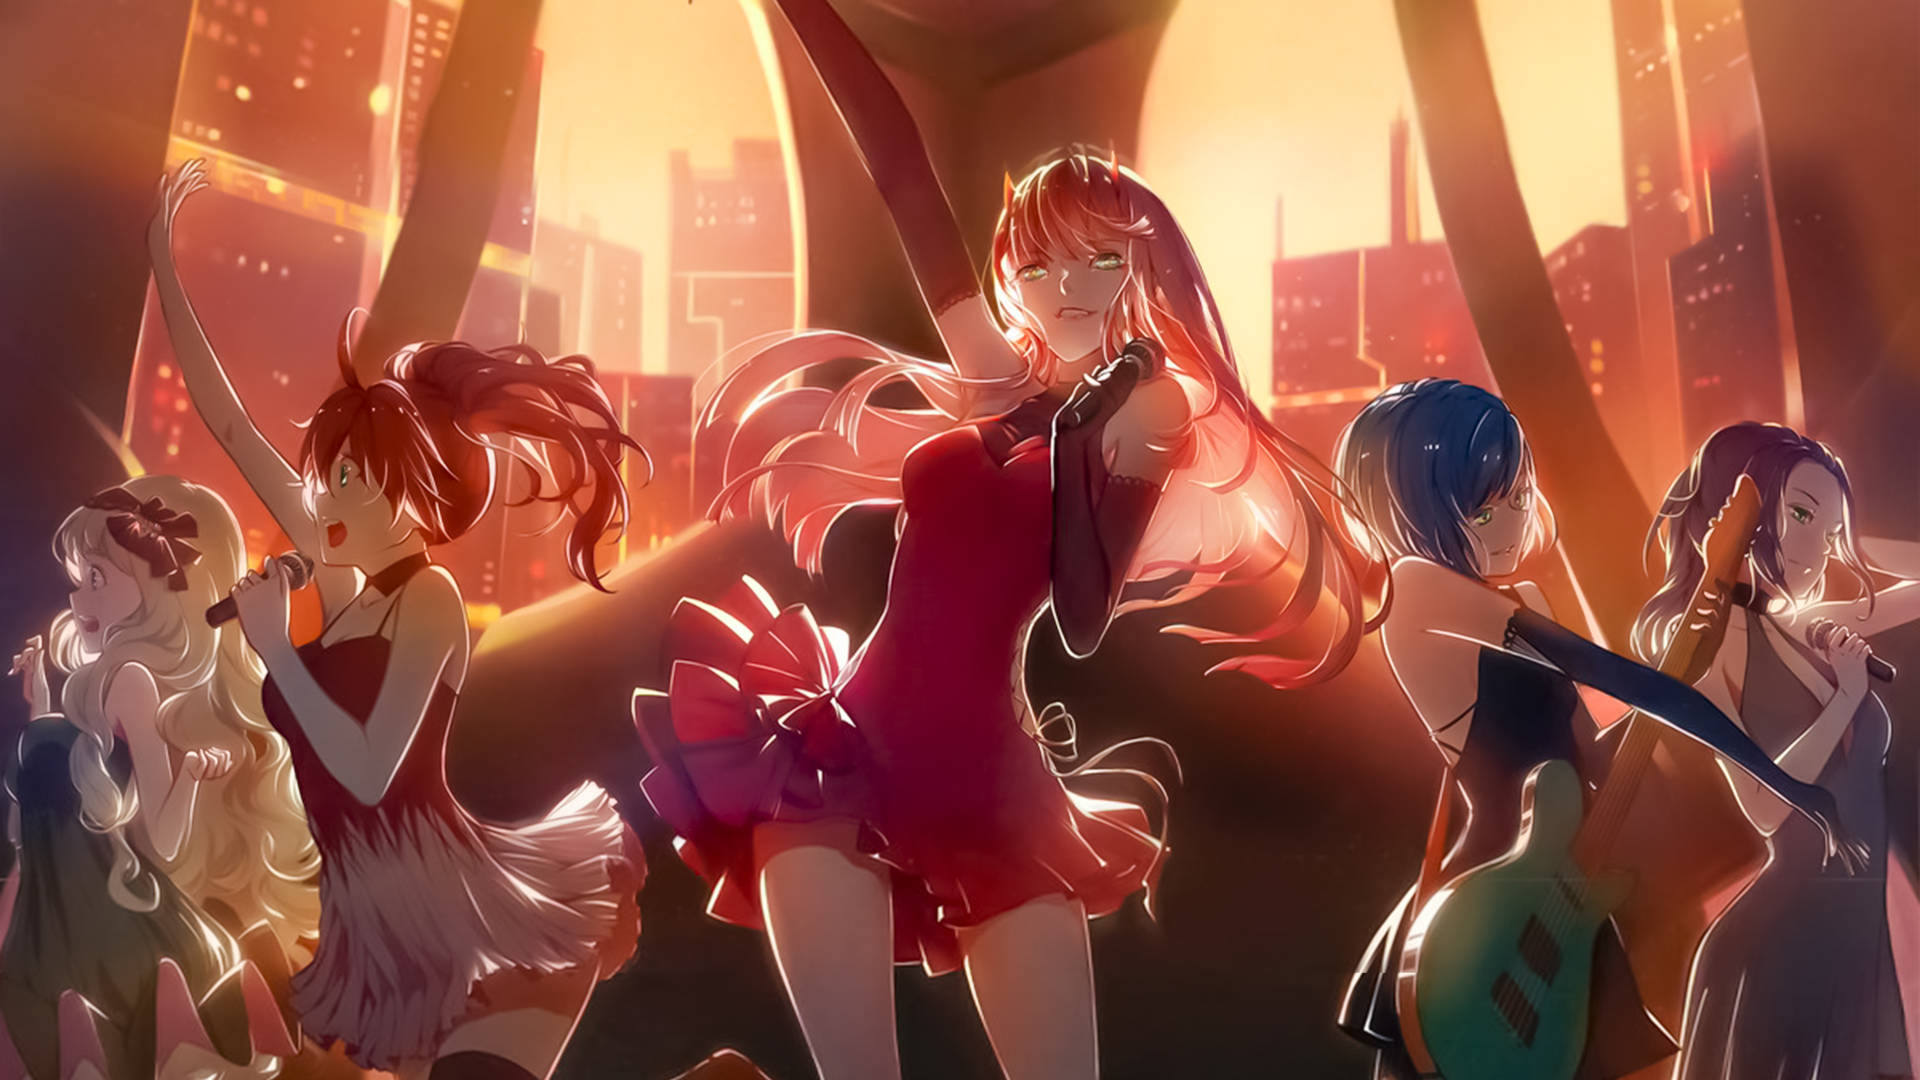 Energetic Anime Girl Band Dancing on Dreamy Stage Wallpaper